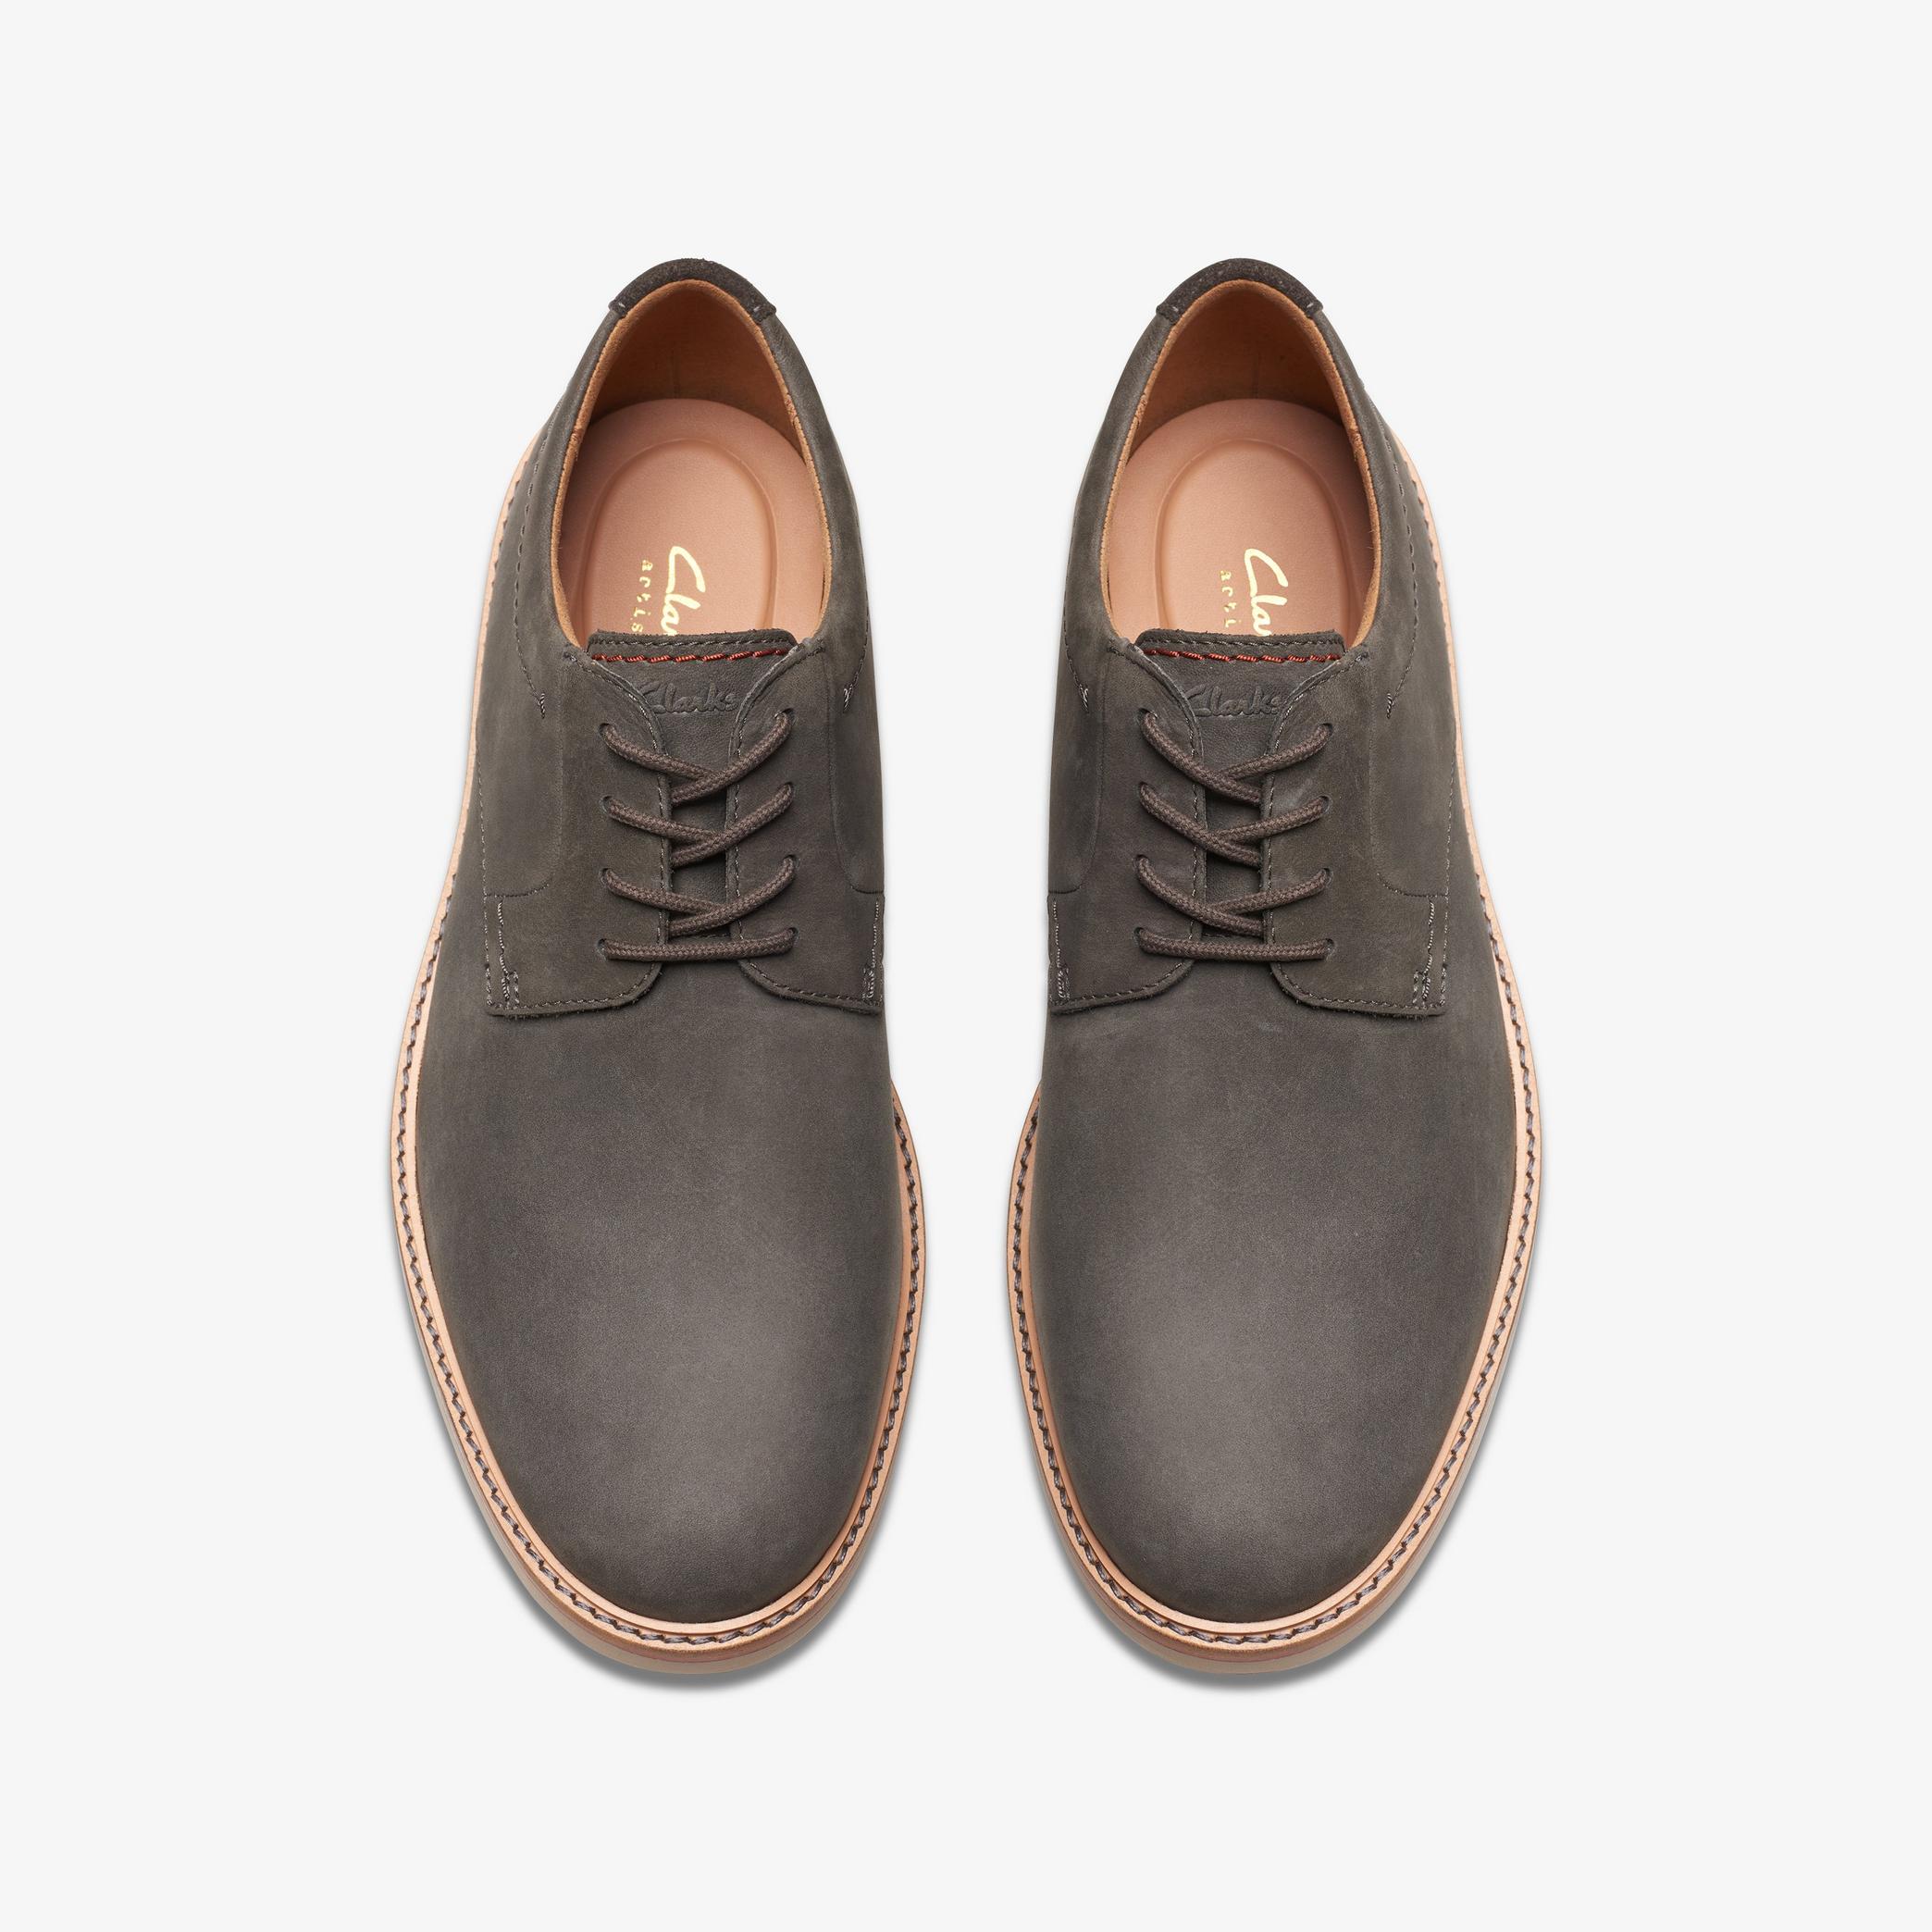 Atticus LT Lace Dark Grey Nubuck Oxford Shoes, view 6 of 6